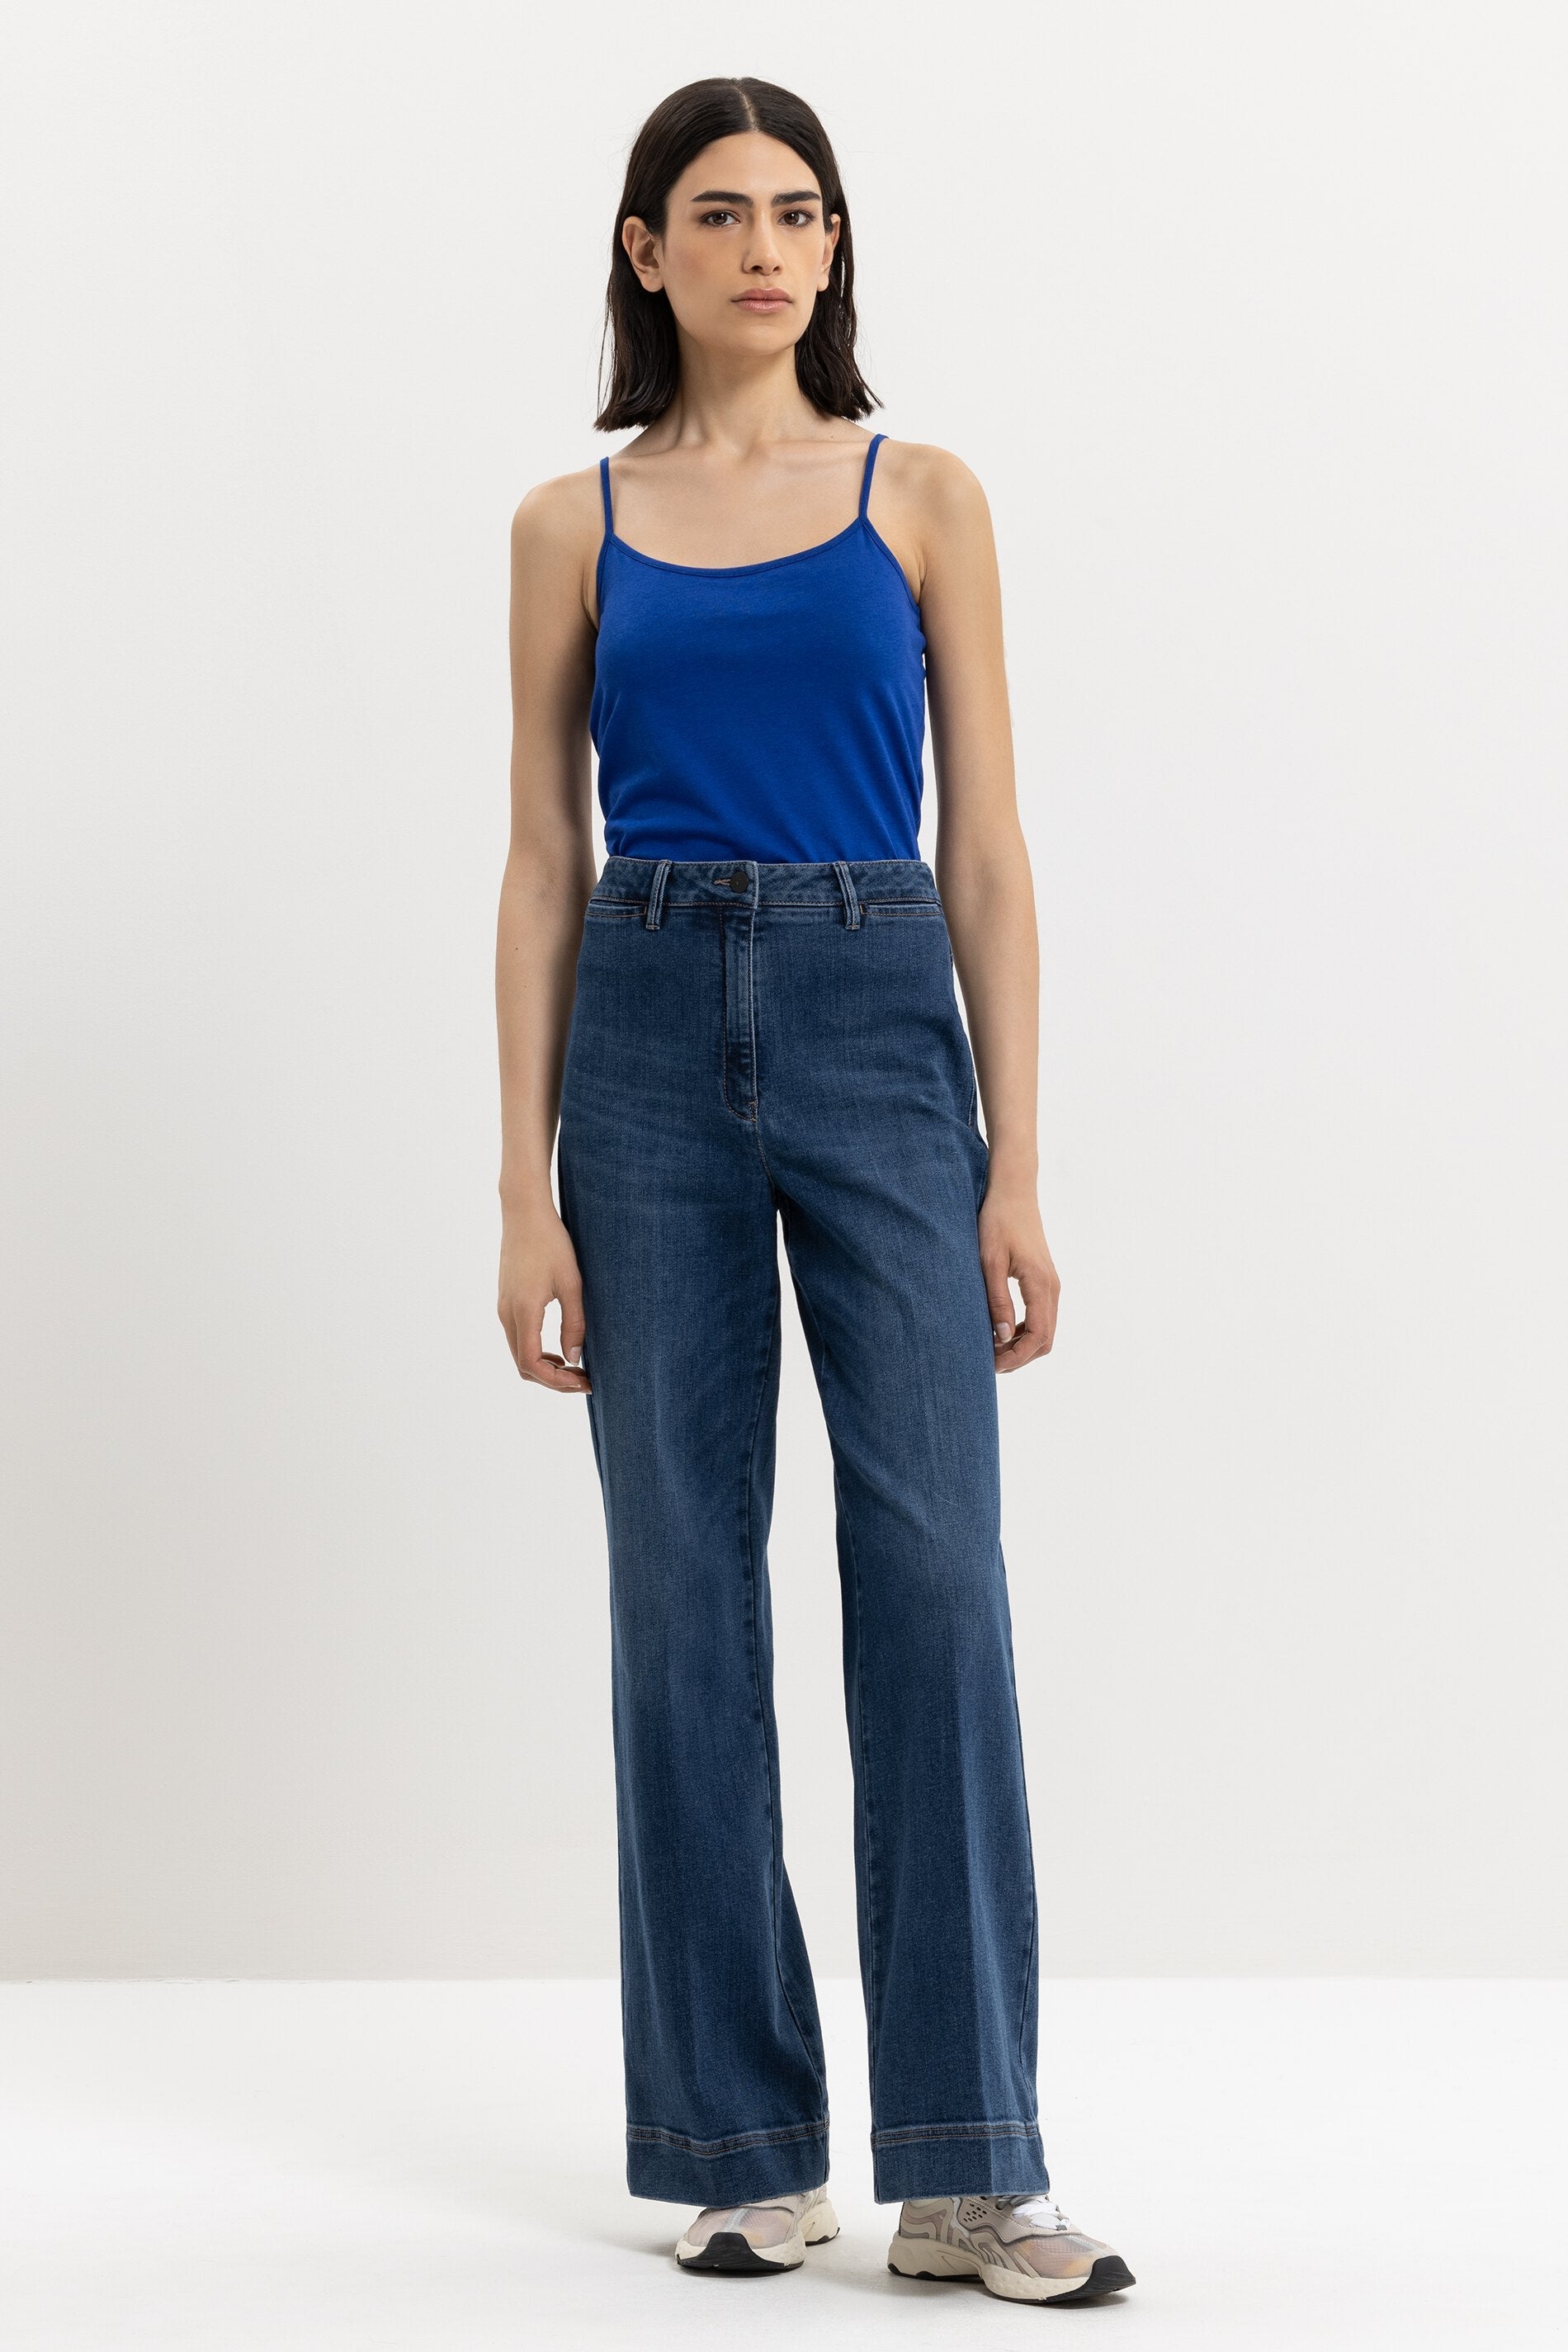 LUISA CERANO-OUTLET-SALE-Basic-Spaghetti-Top-Shirts-by-ARCHIVIST